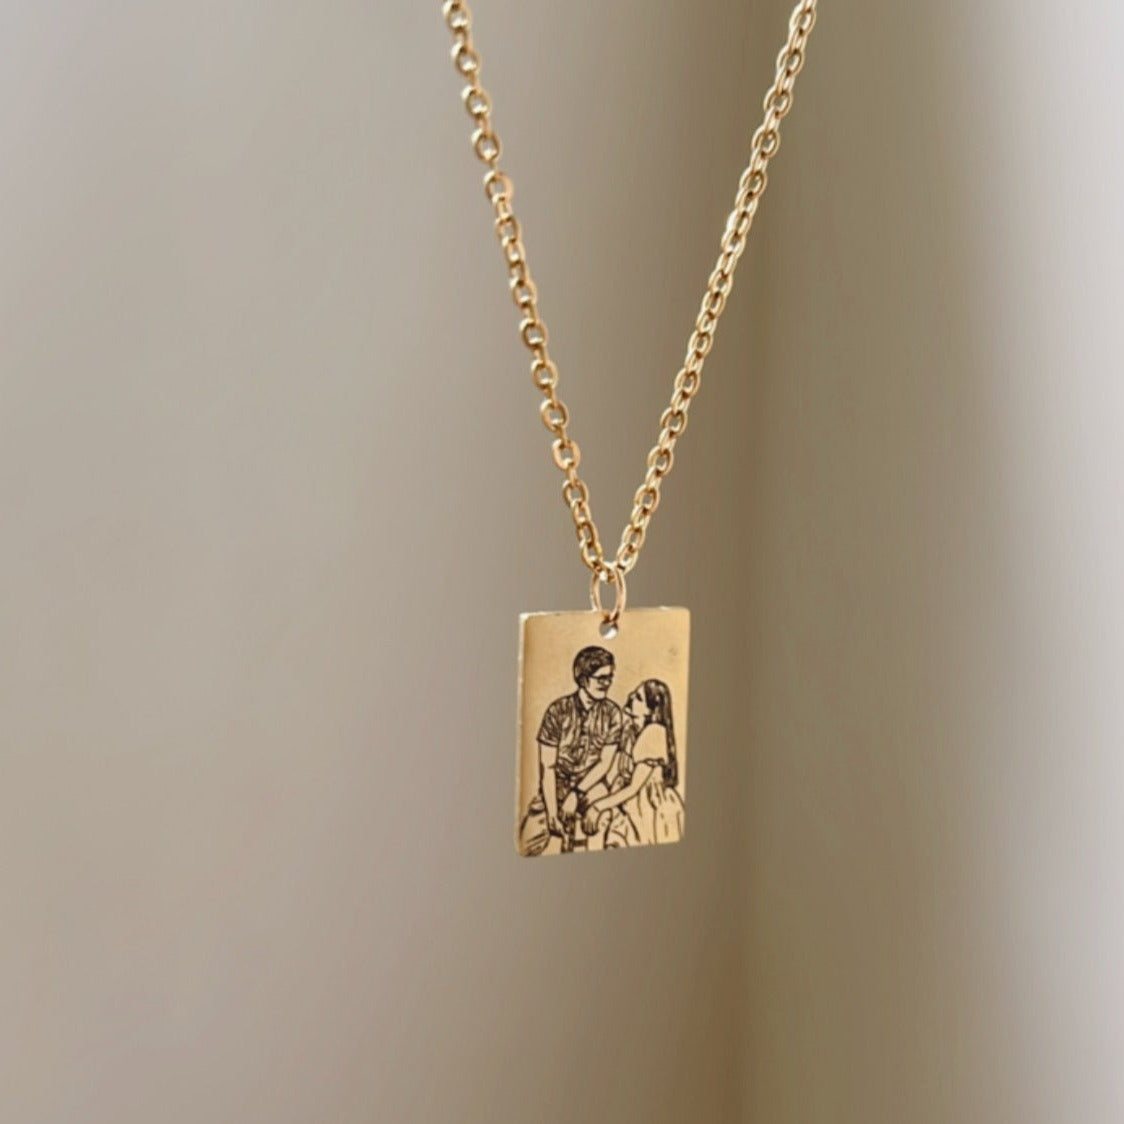 LIMITED Lazer Engraved Rectangle Necklace FOR GUYS - LINE ART